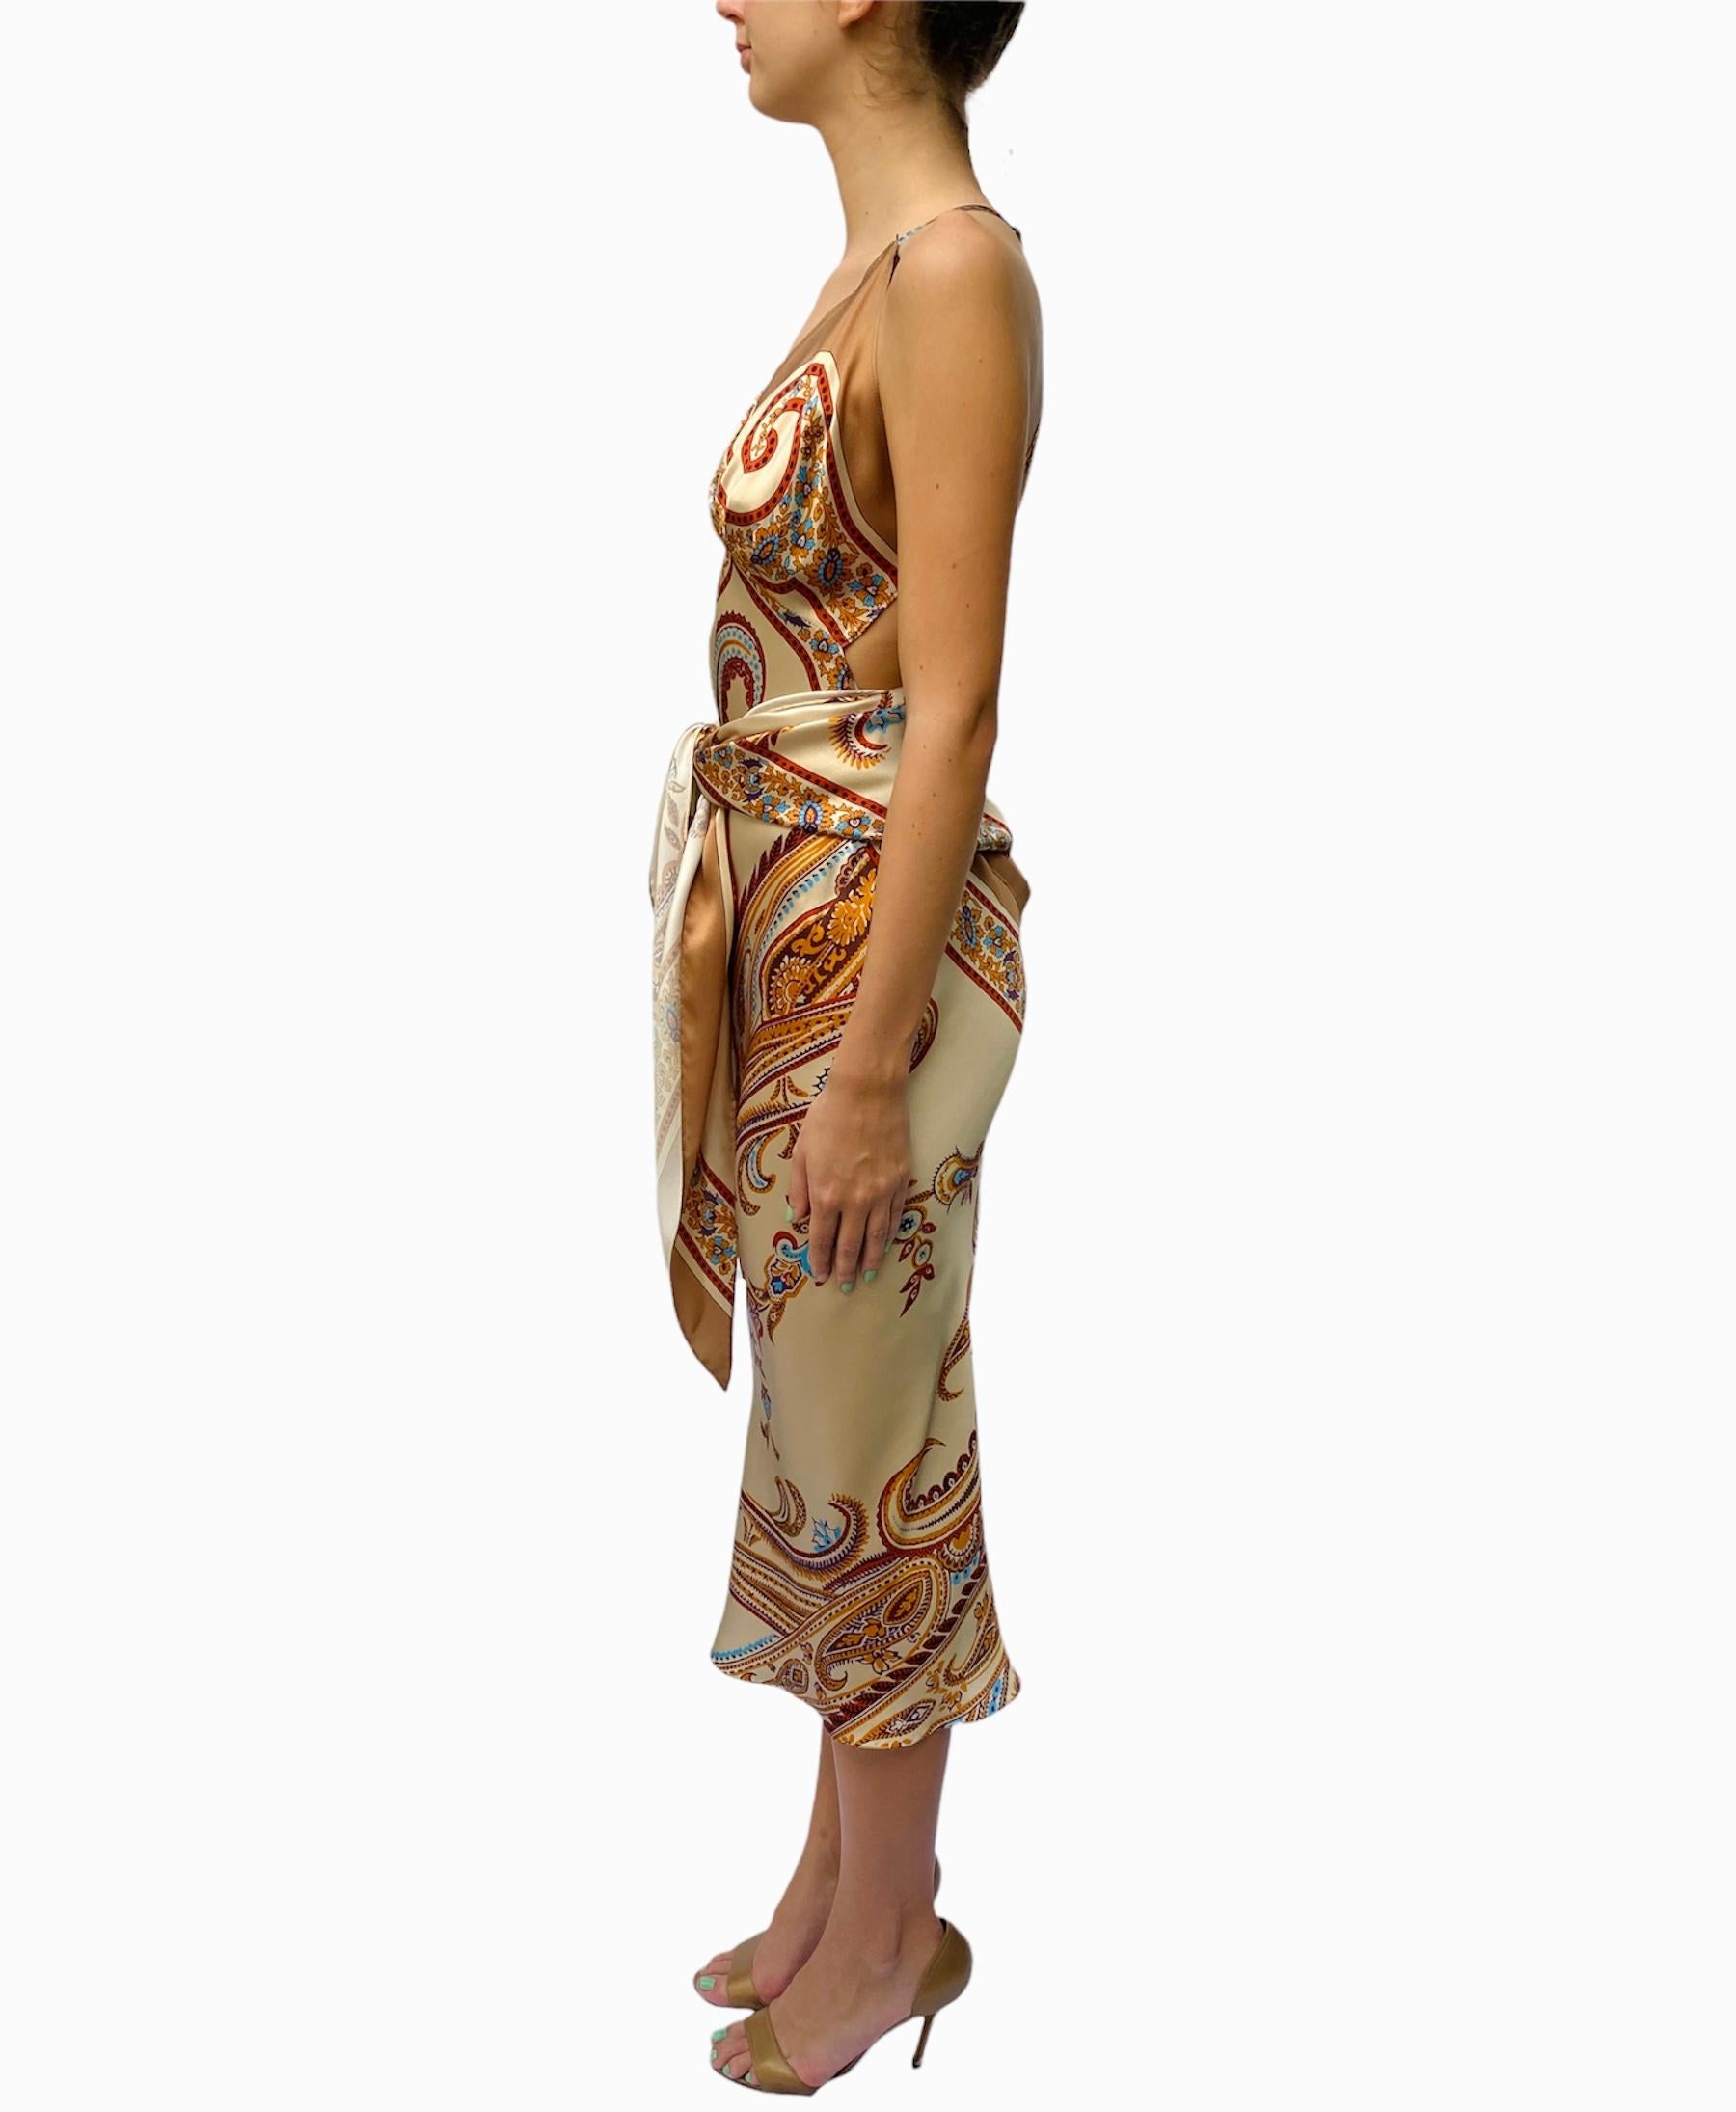 The Collective Cream & Orange Silk Twill Paisley Print Scarf Dress Made Fro Excellent état - En vente à New York, NY